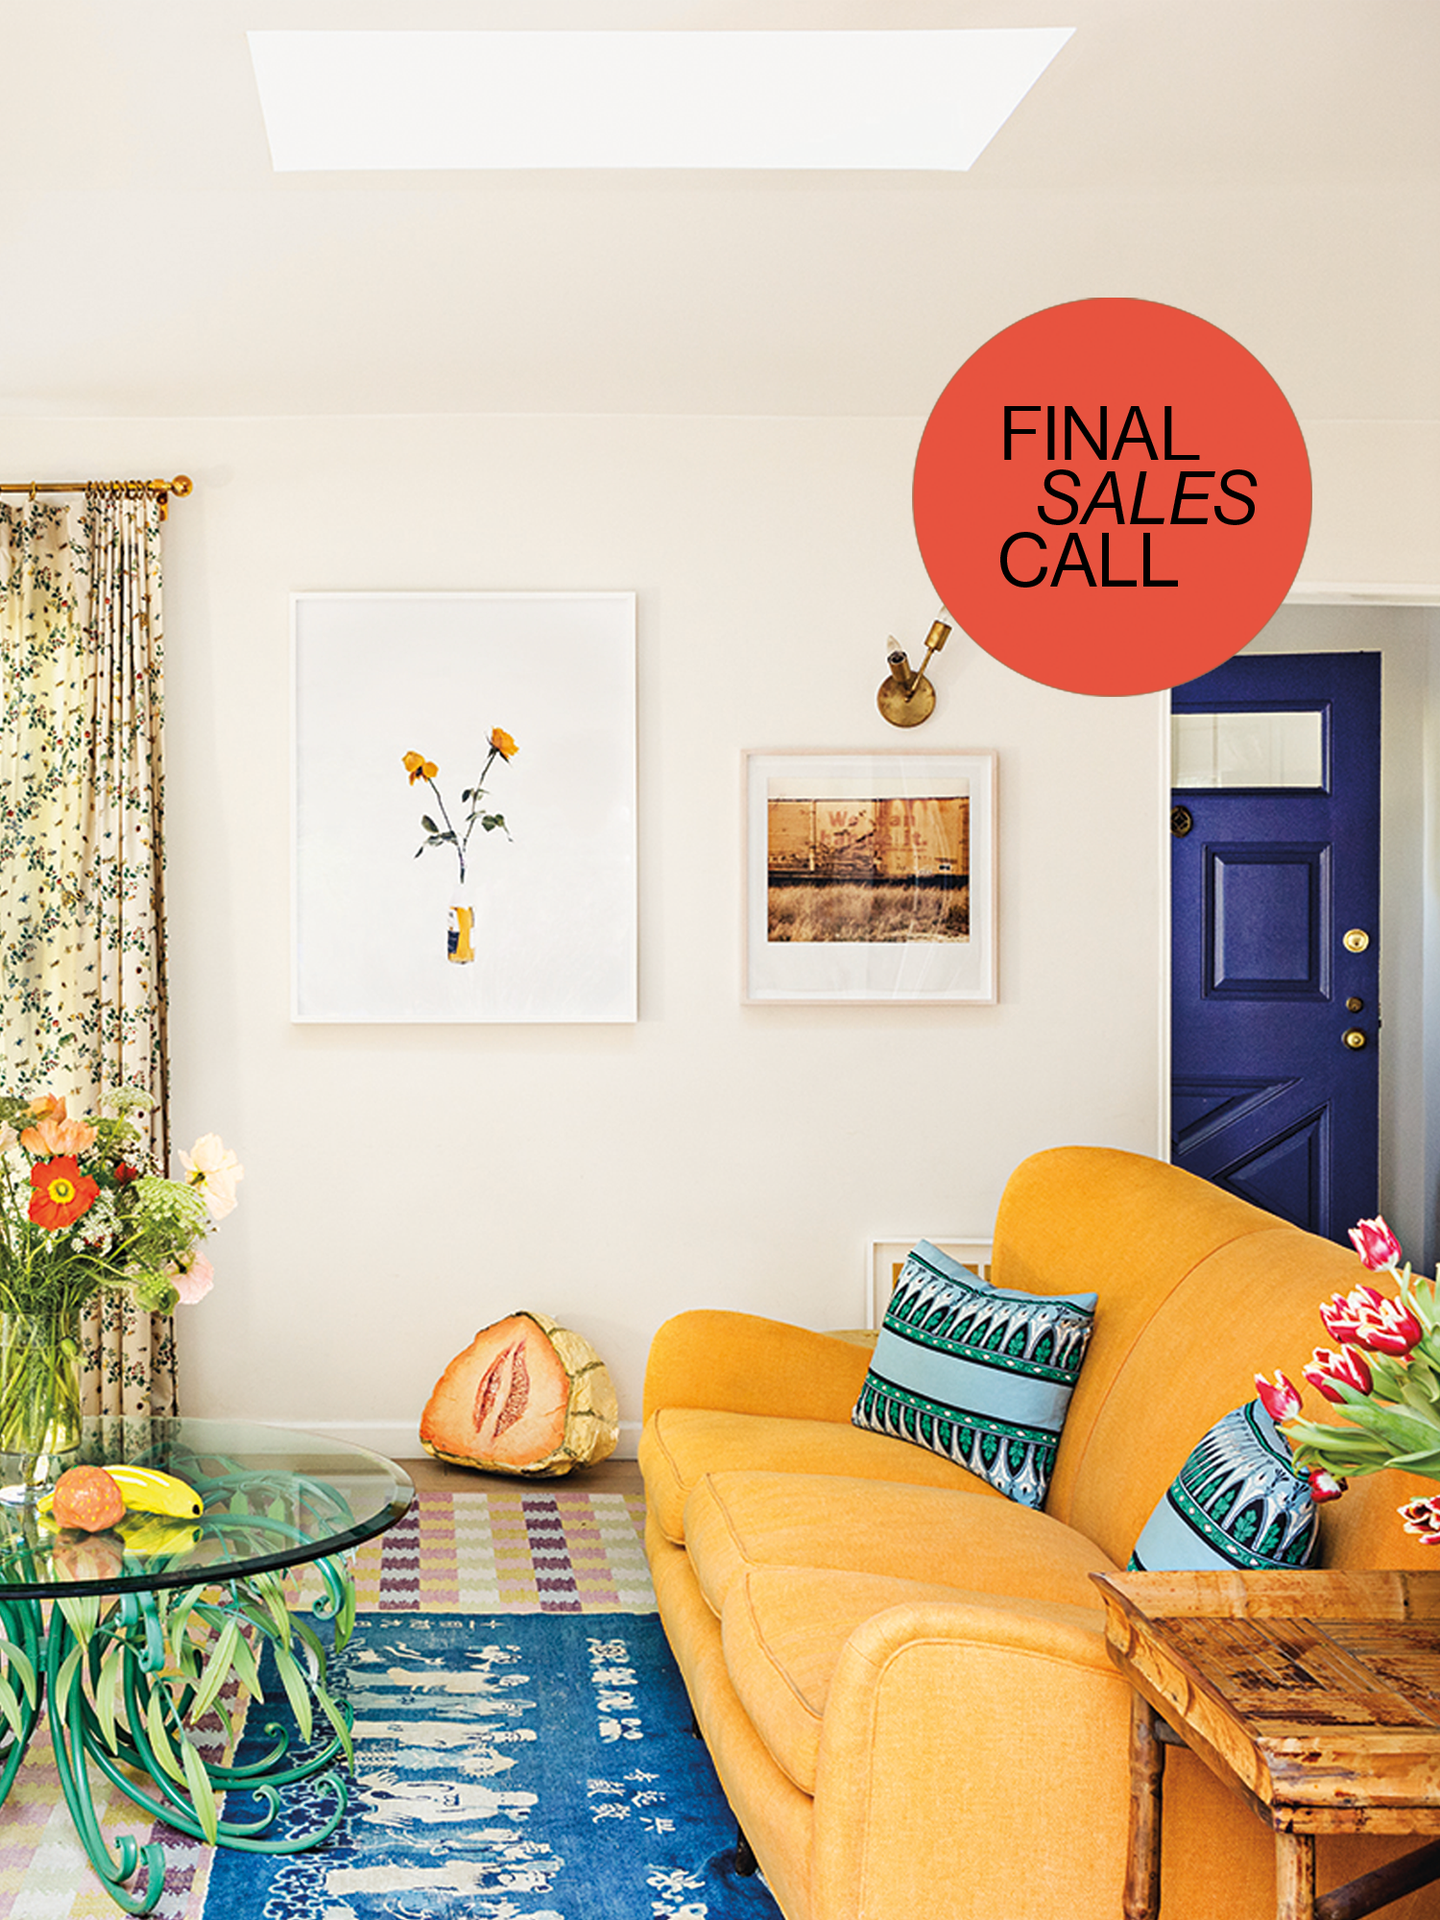 Lifestyle åimage of a bright living room with a yellow couch and a red badge that reads "Final Sales Call."